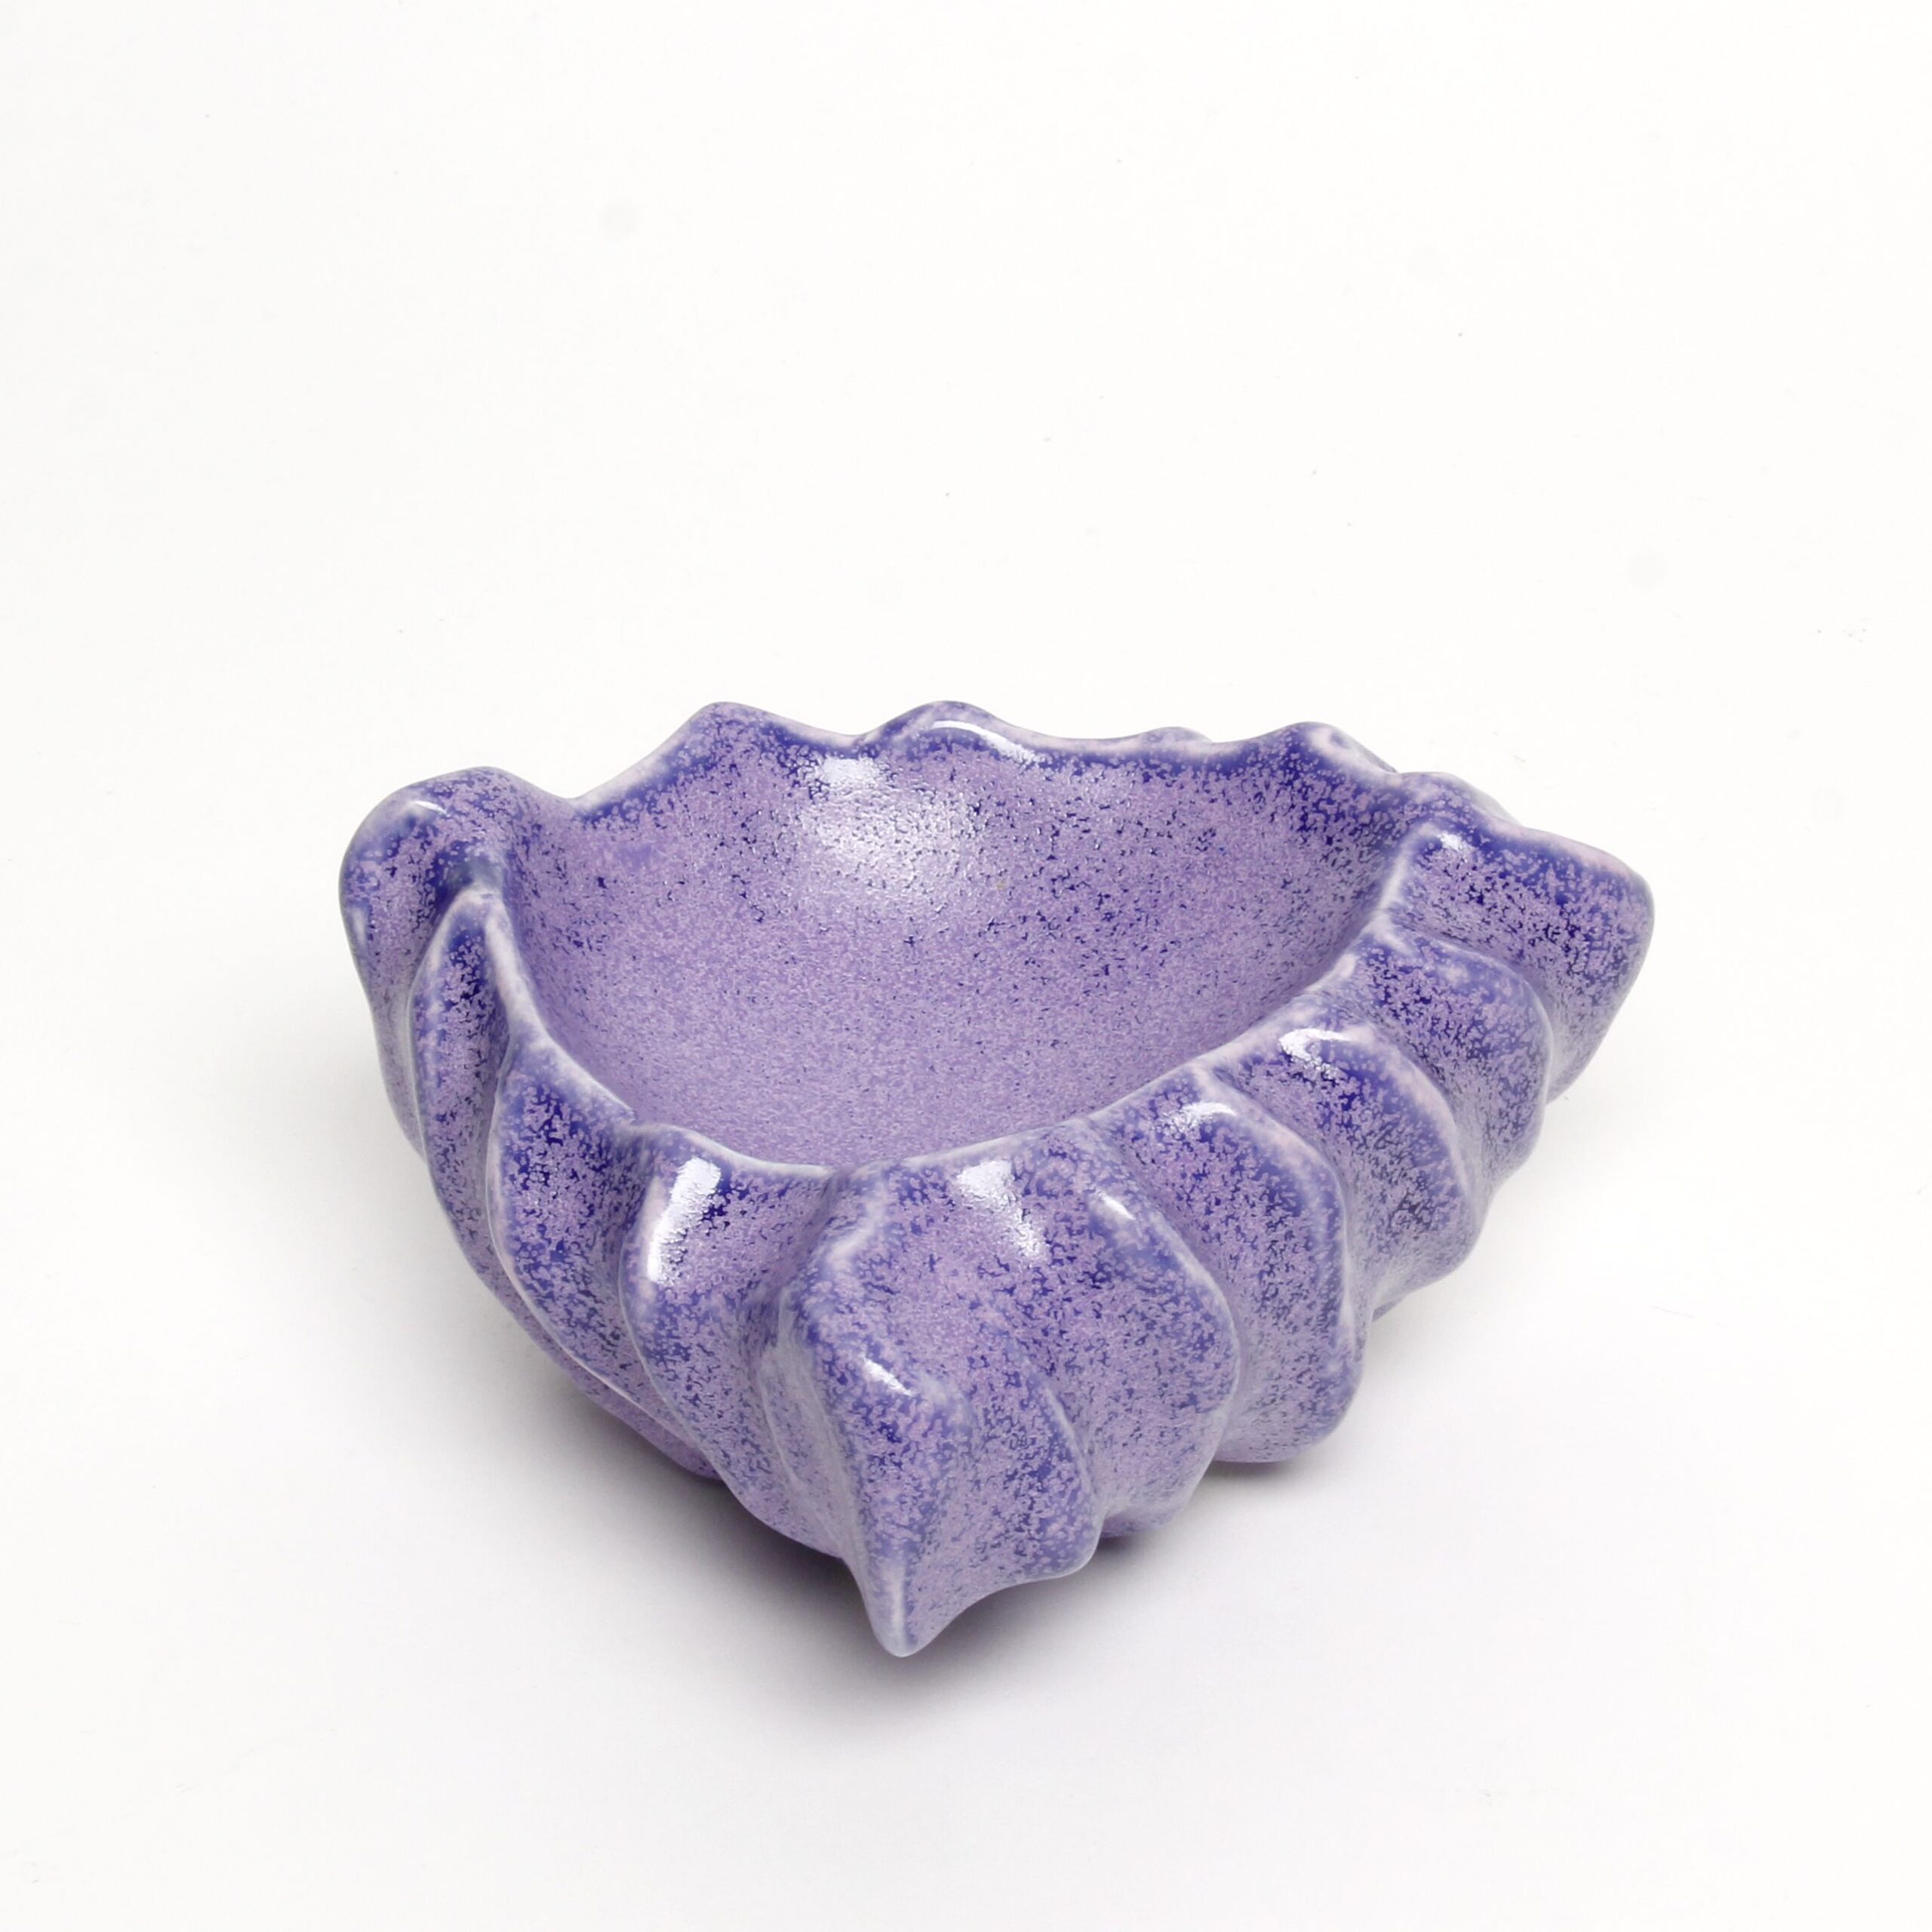 William Lee: Triangle Bowl in Purple Product Image 1 of 3